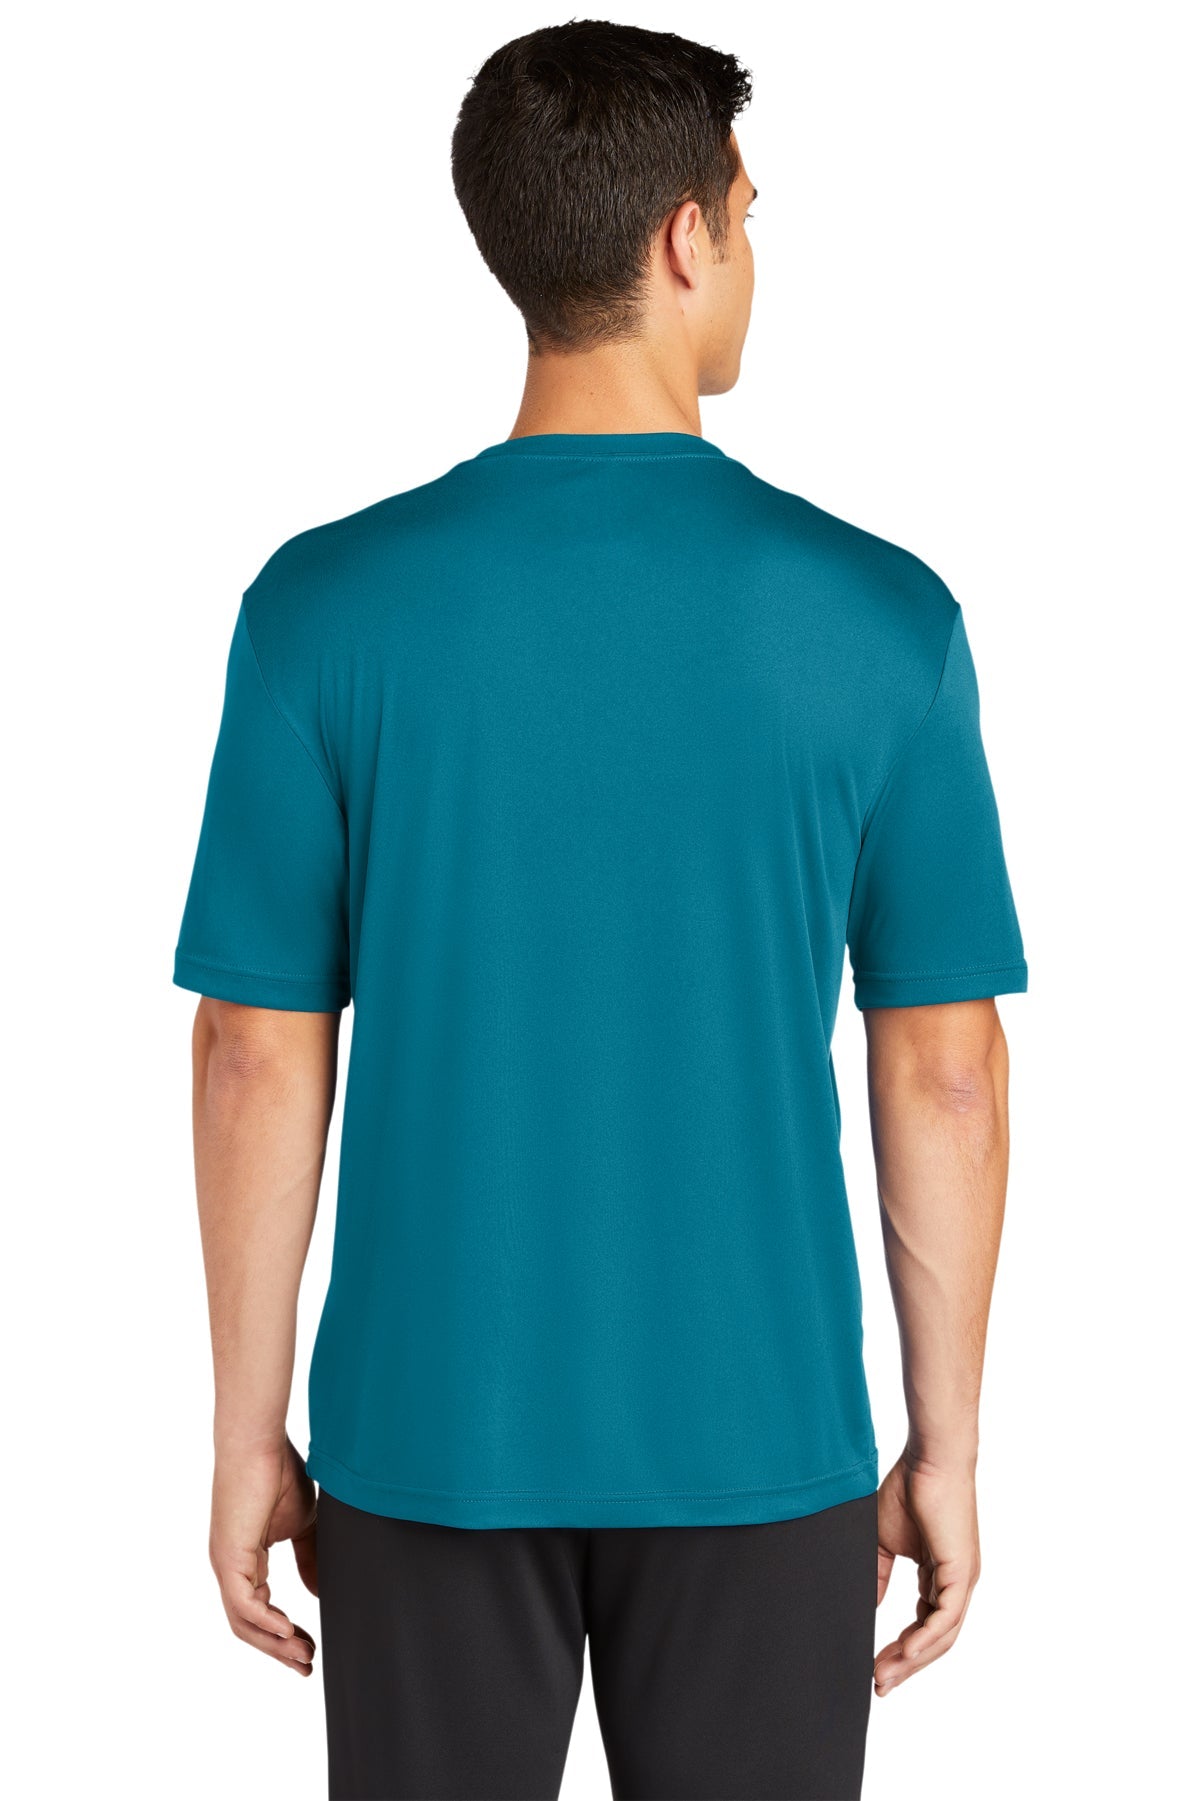 Sport-Tek Tall PosiCharge Branded Competitor Tee's, Tropic Blue